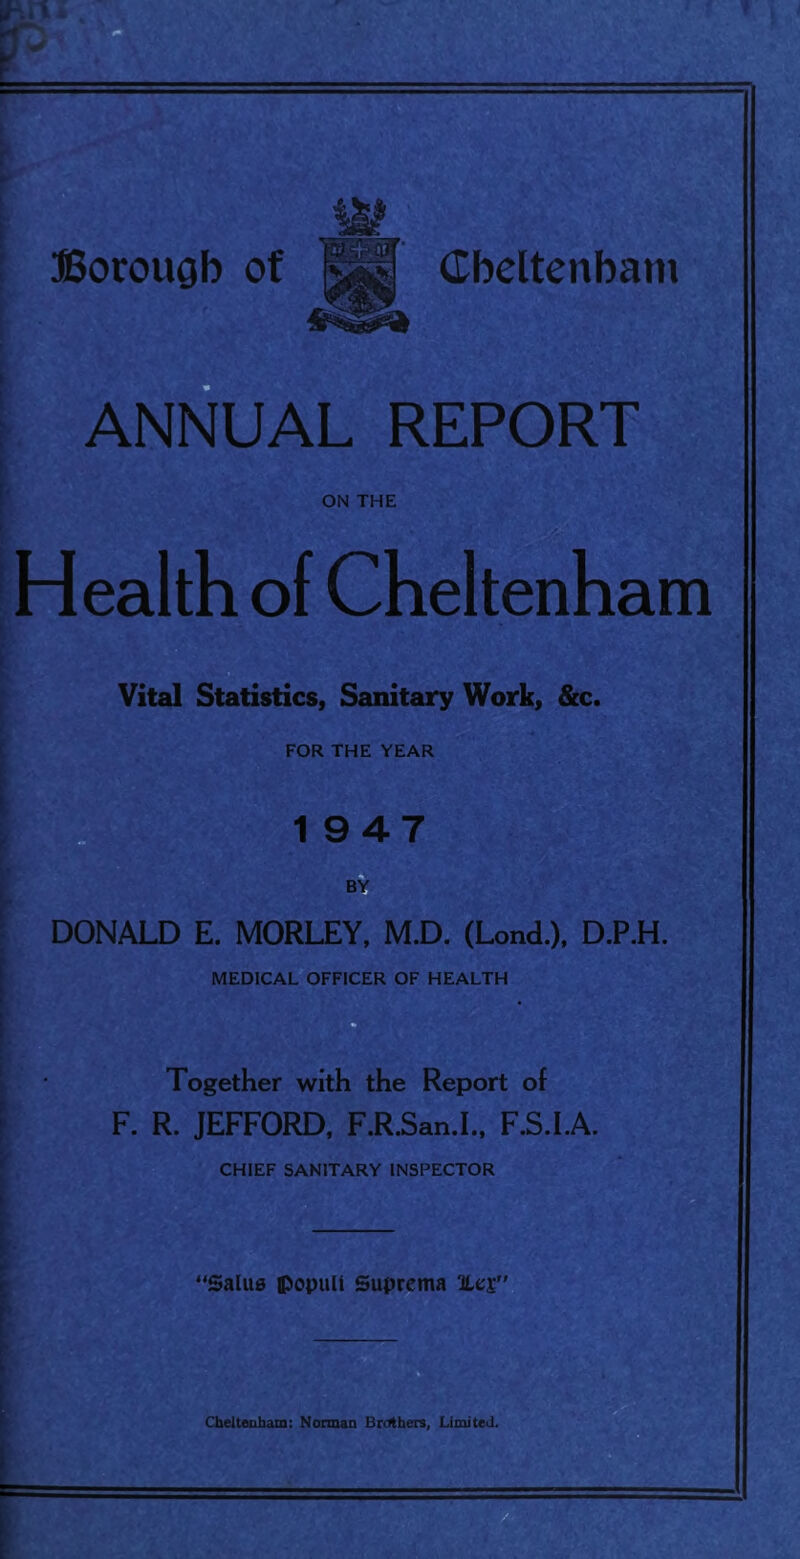 } ( ANNUAL REPORT ON THE Health of Cheltenham Vital Statistics, Sanitary Work, &c. FOR THE YEAR 1 947 DONALD E. MORLEY, M.D. (Lond.), D.P.H. MEDICAL OFFICER OF HEALTH Together with the Report of F. R. JEFFORD, F.R.San.I., F.S.I.A. CHIEF SANITARY INSPECTOR 'SalU0 {>opun Suprema Cheltealiam: Norman Brotben, LimiteJ.